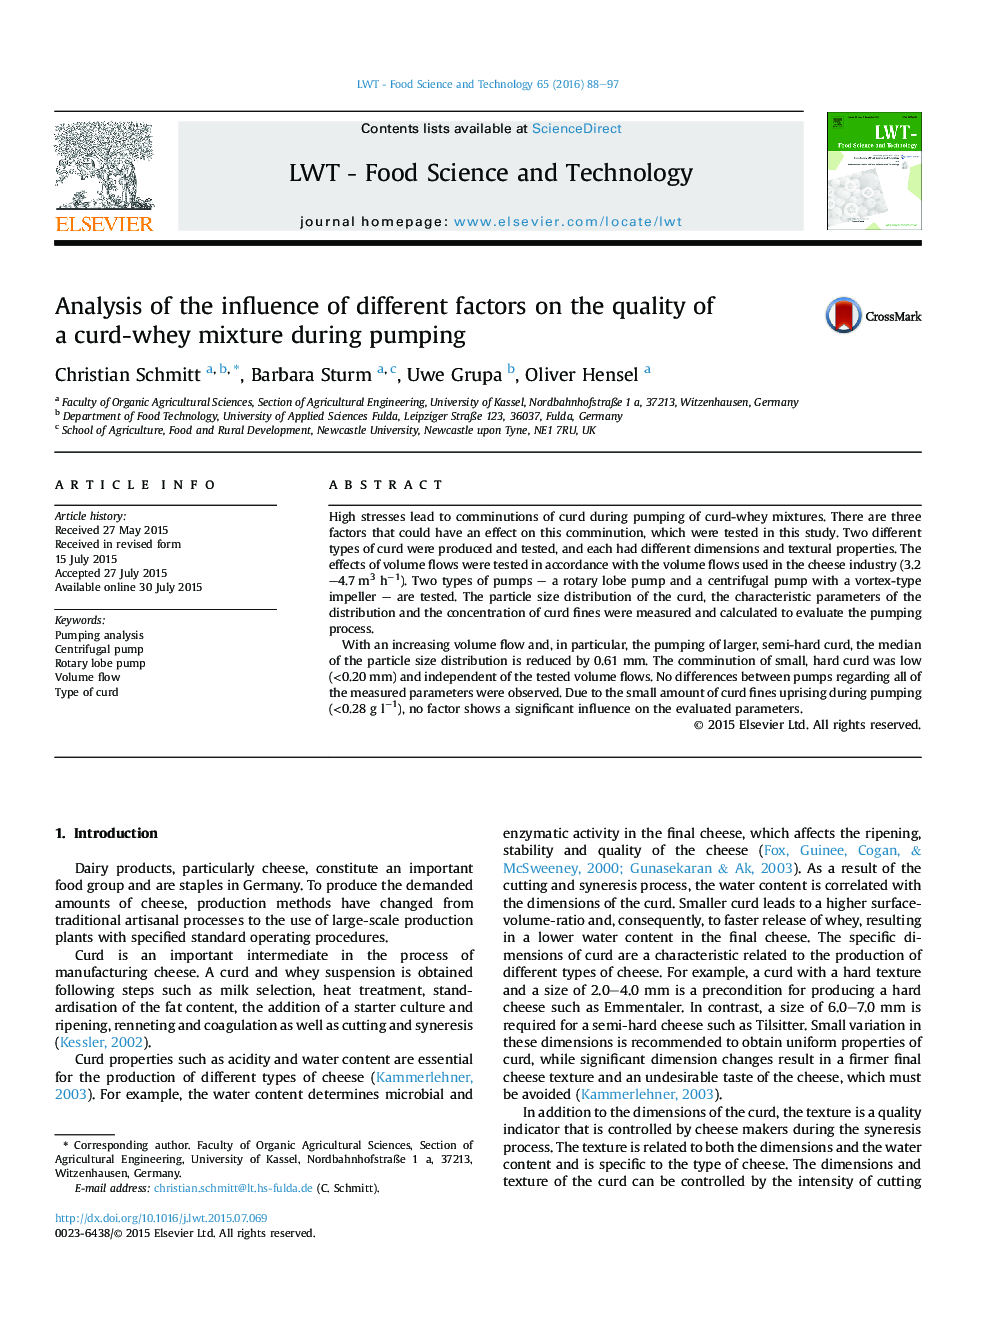 Analysis of the influence of different factors on the quality of aÂ curd-whey mixture during pumping